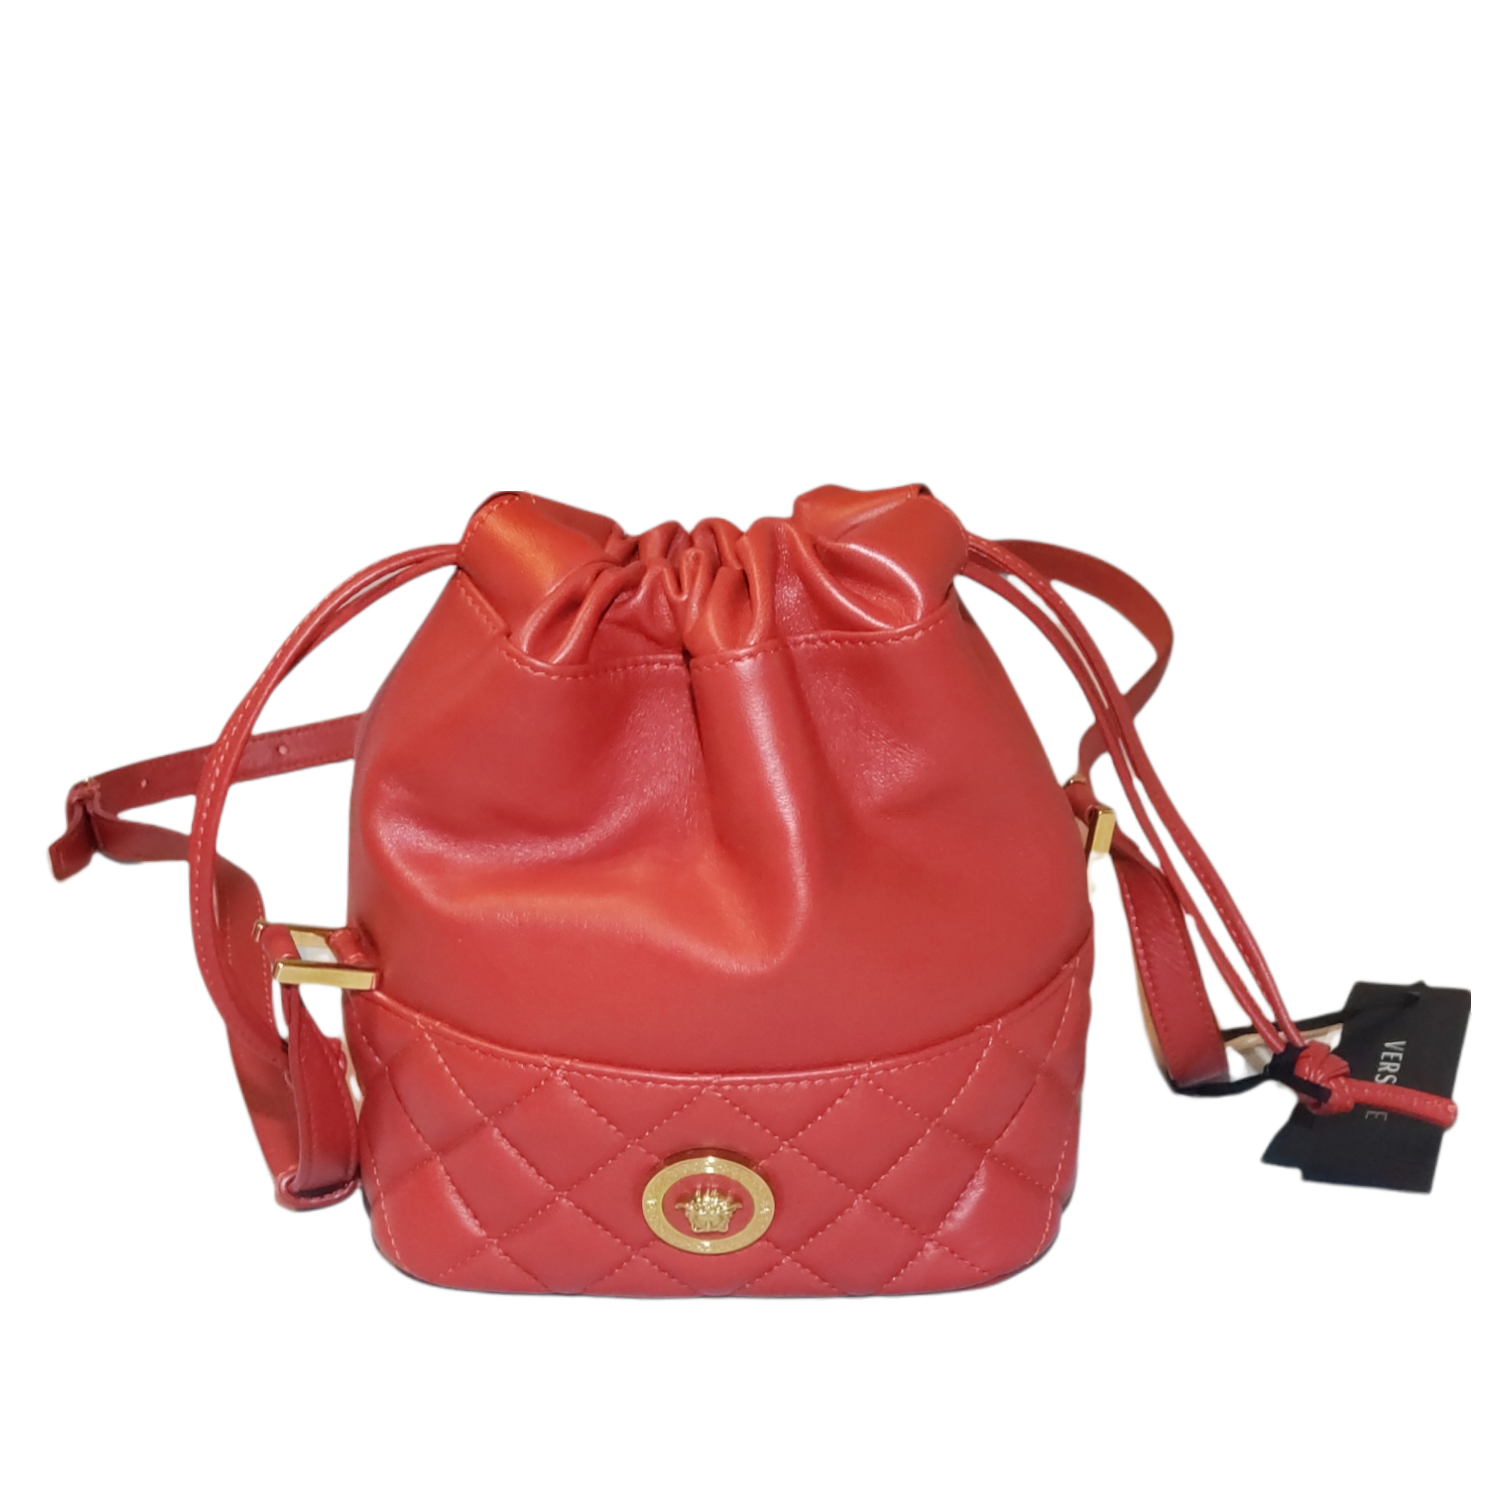 Versace Red Leather Medusa Quilted Drawstring Bucket Bag DBFI173S